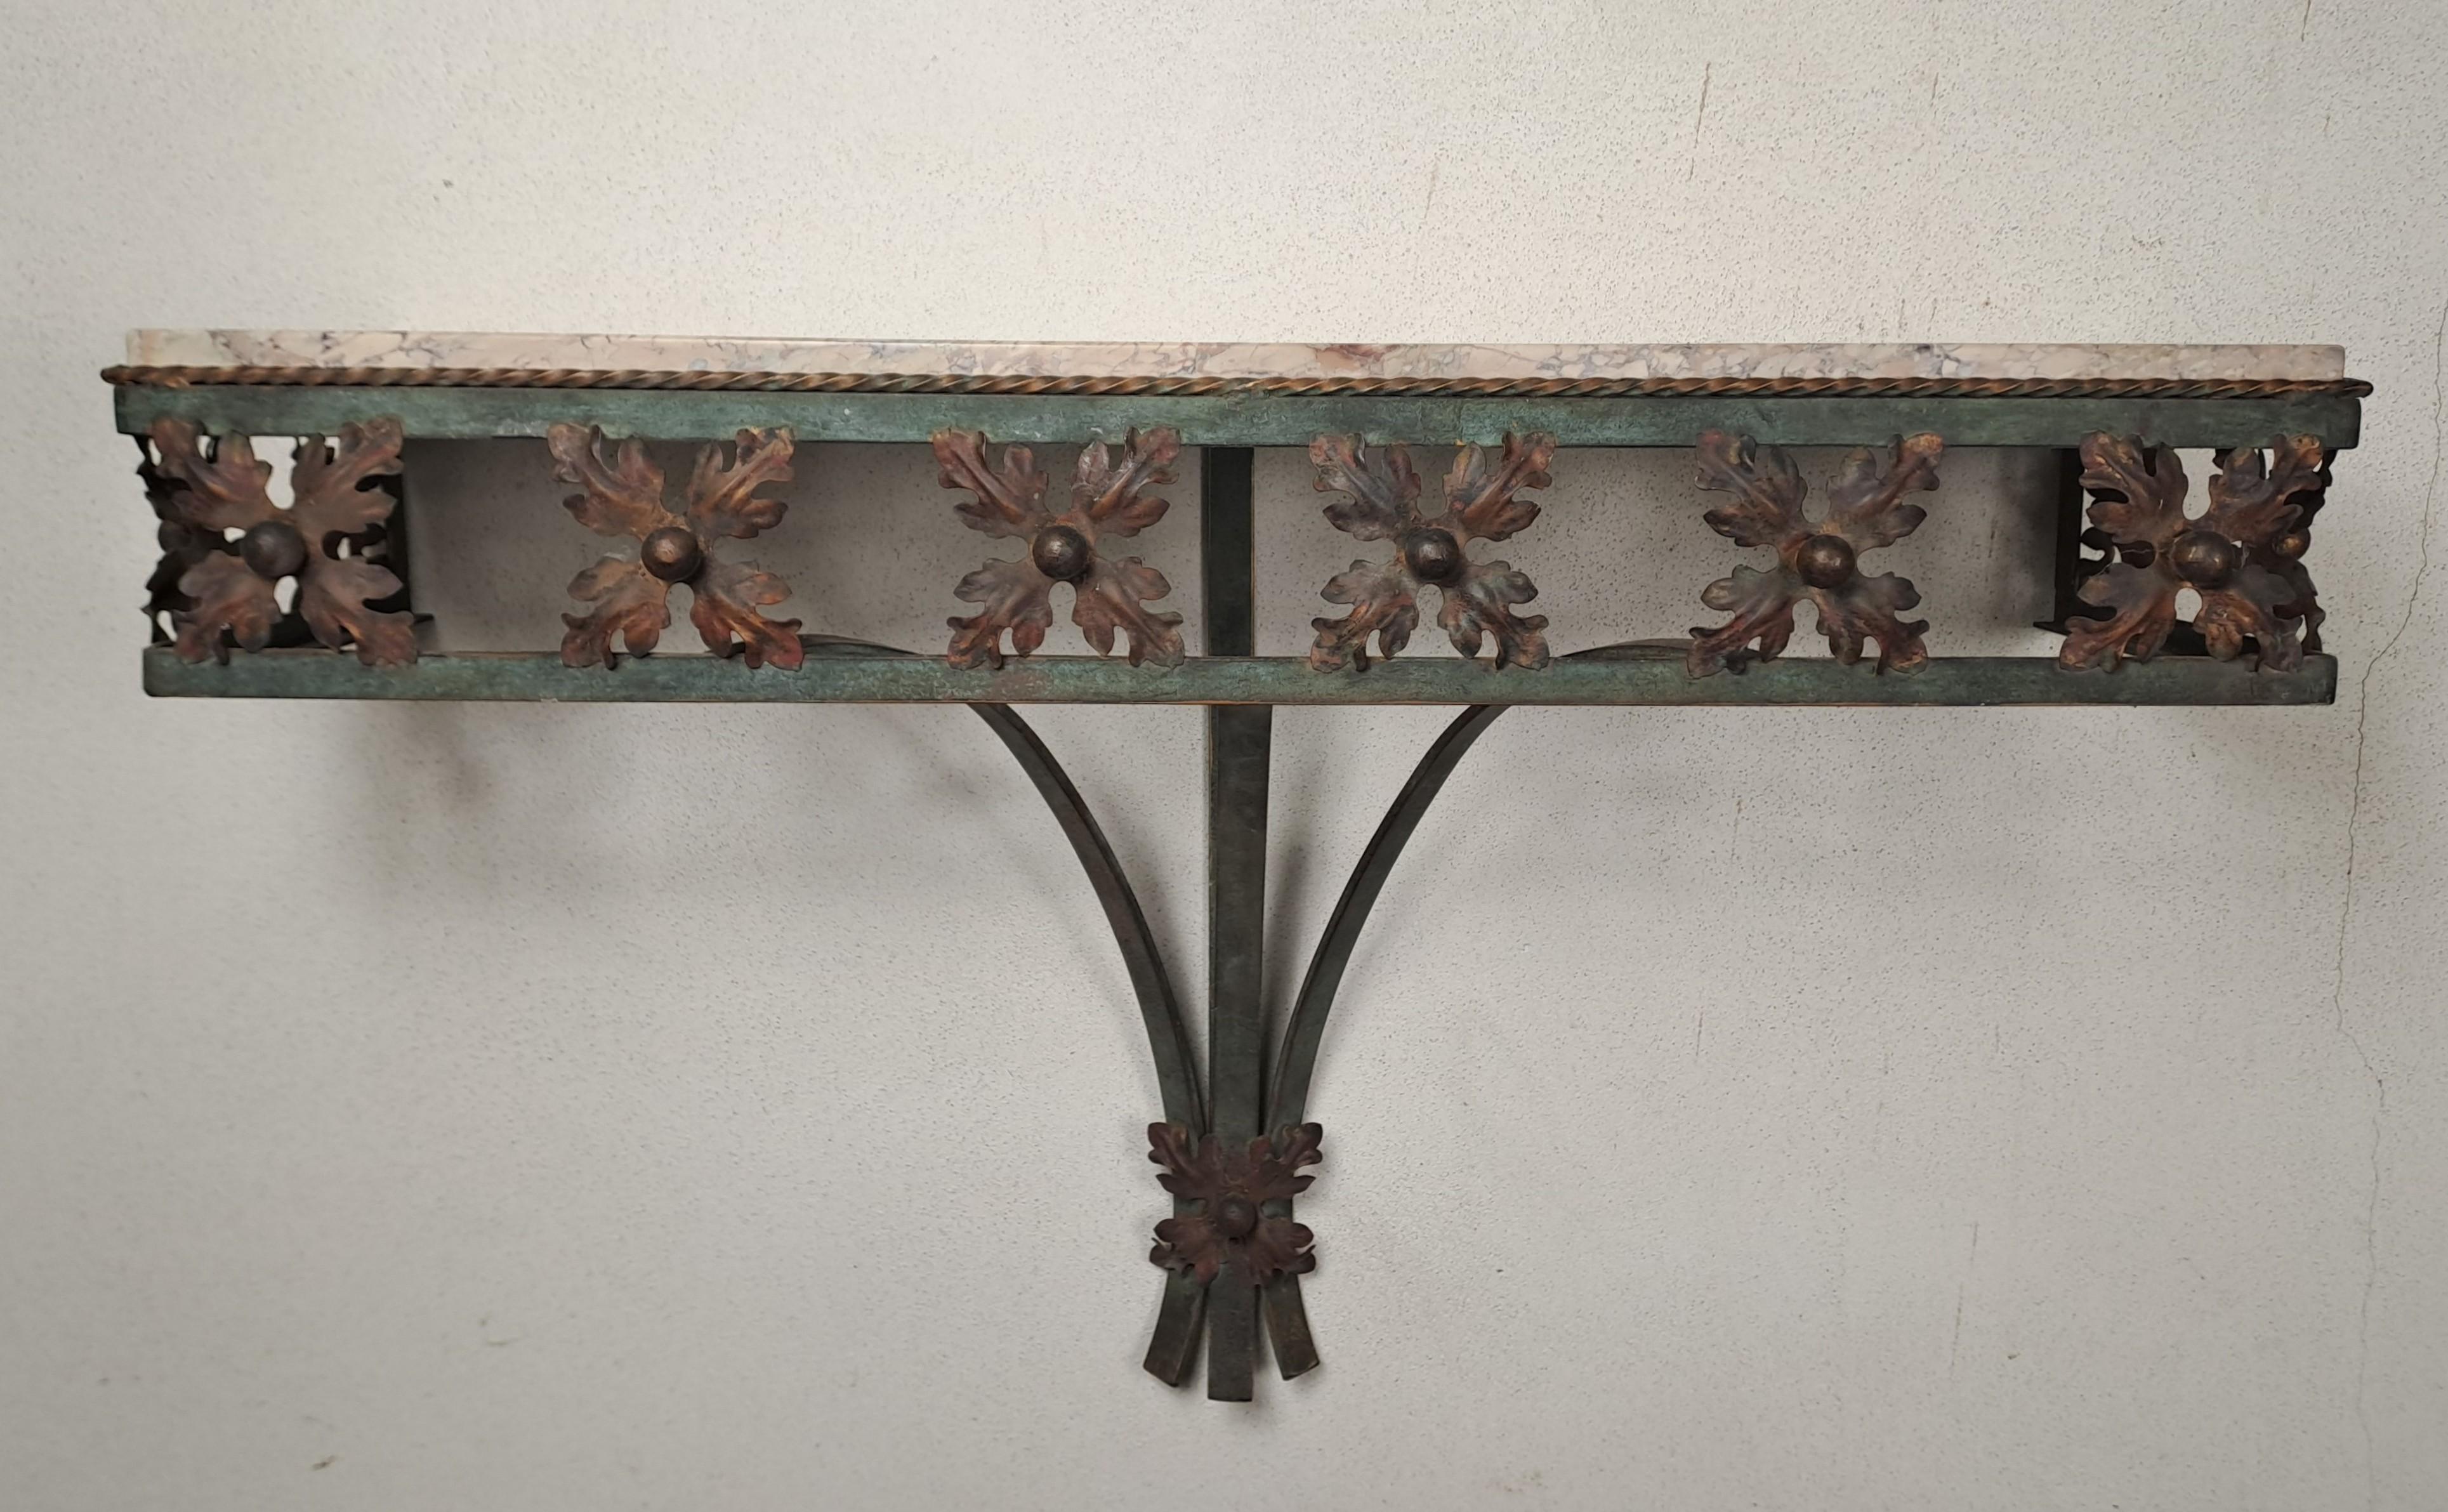 Beautiful green and bronze lacquered wrought iron in-between console decorated with quartefeuilles in belt and veined beige marble top (probably Campan or Sarrancolin)

Art deco work from the 1940s in the style of Poillerat

Very good condition